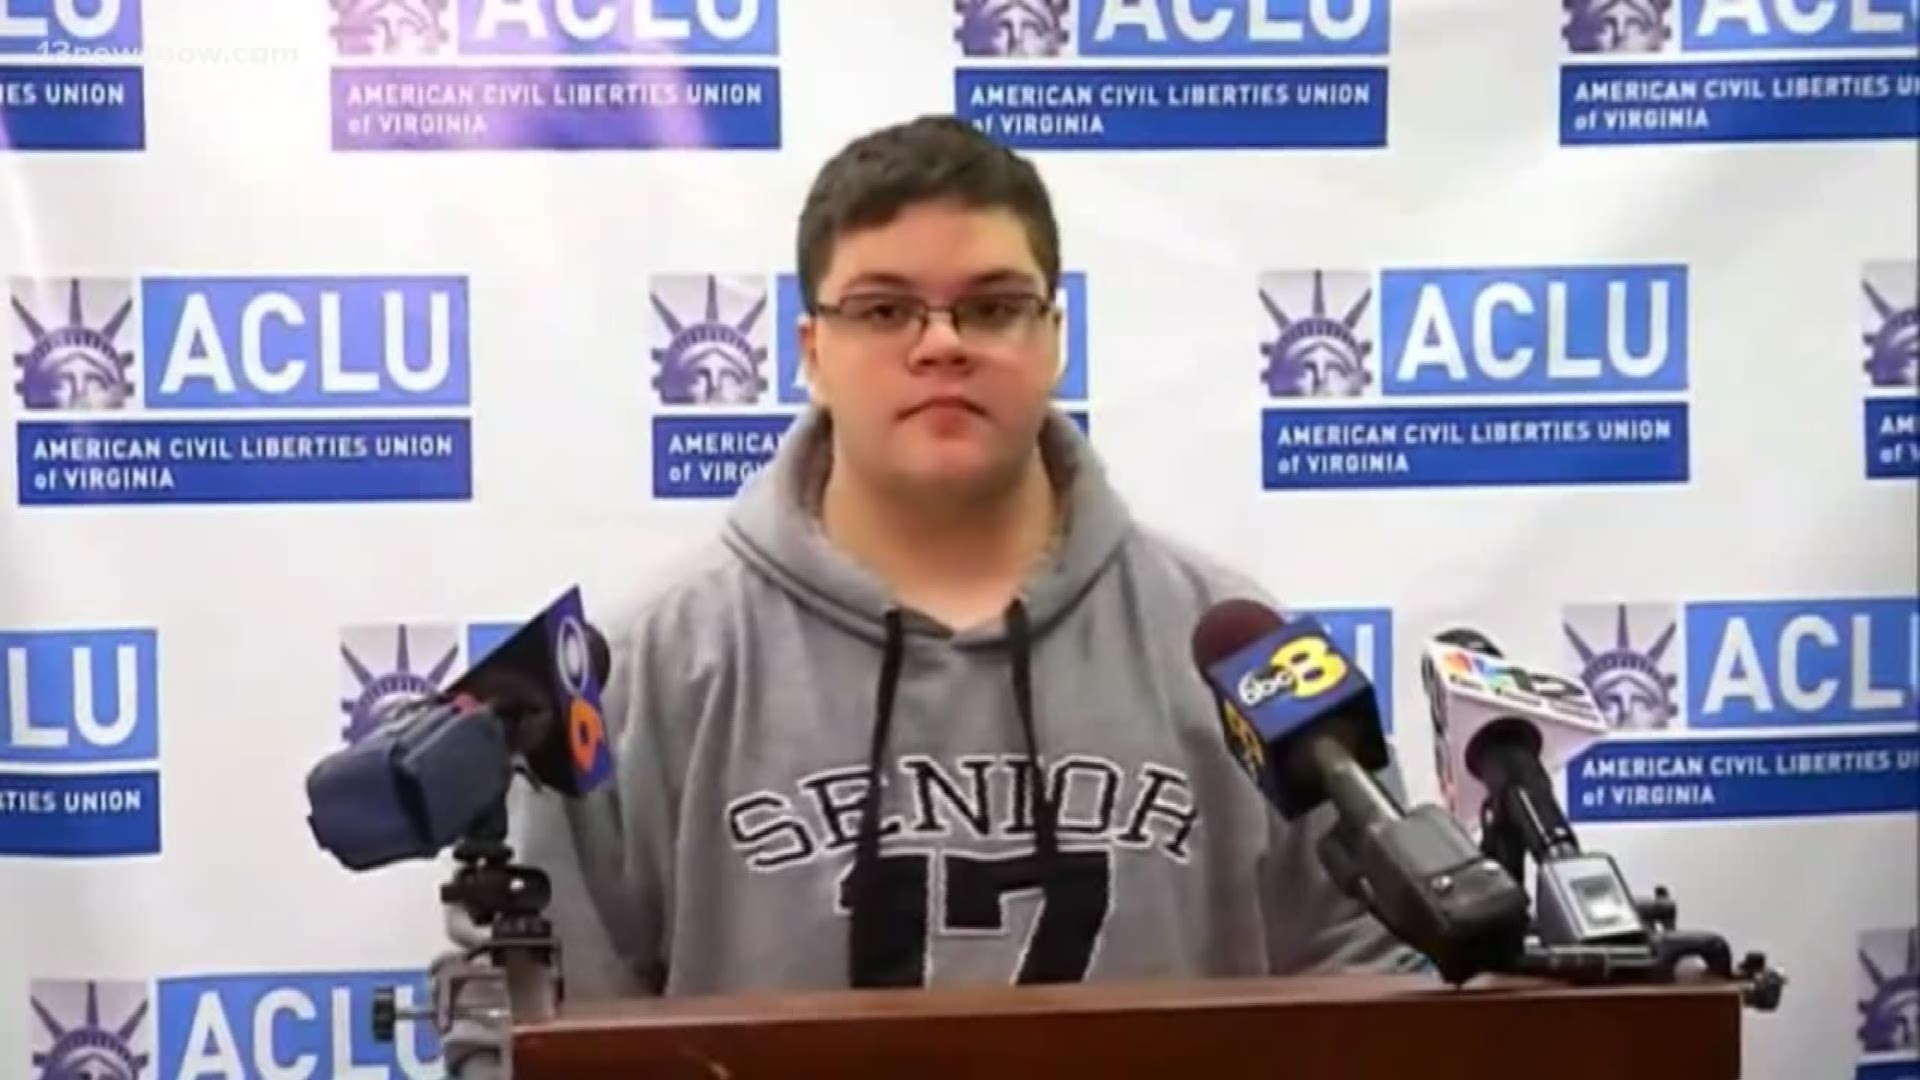 A federal judge ruled the Gloucester County School Board violated Gavin Grimm's rights when it banned him from using boys' bathrooms.